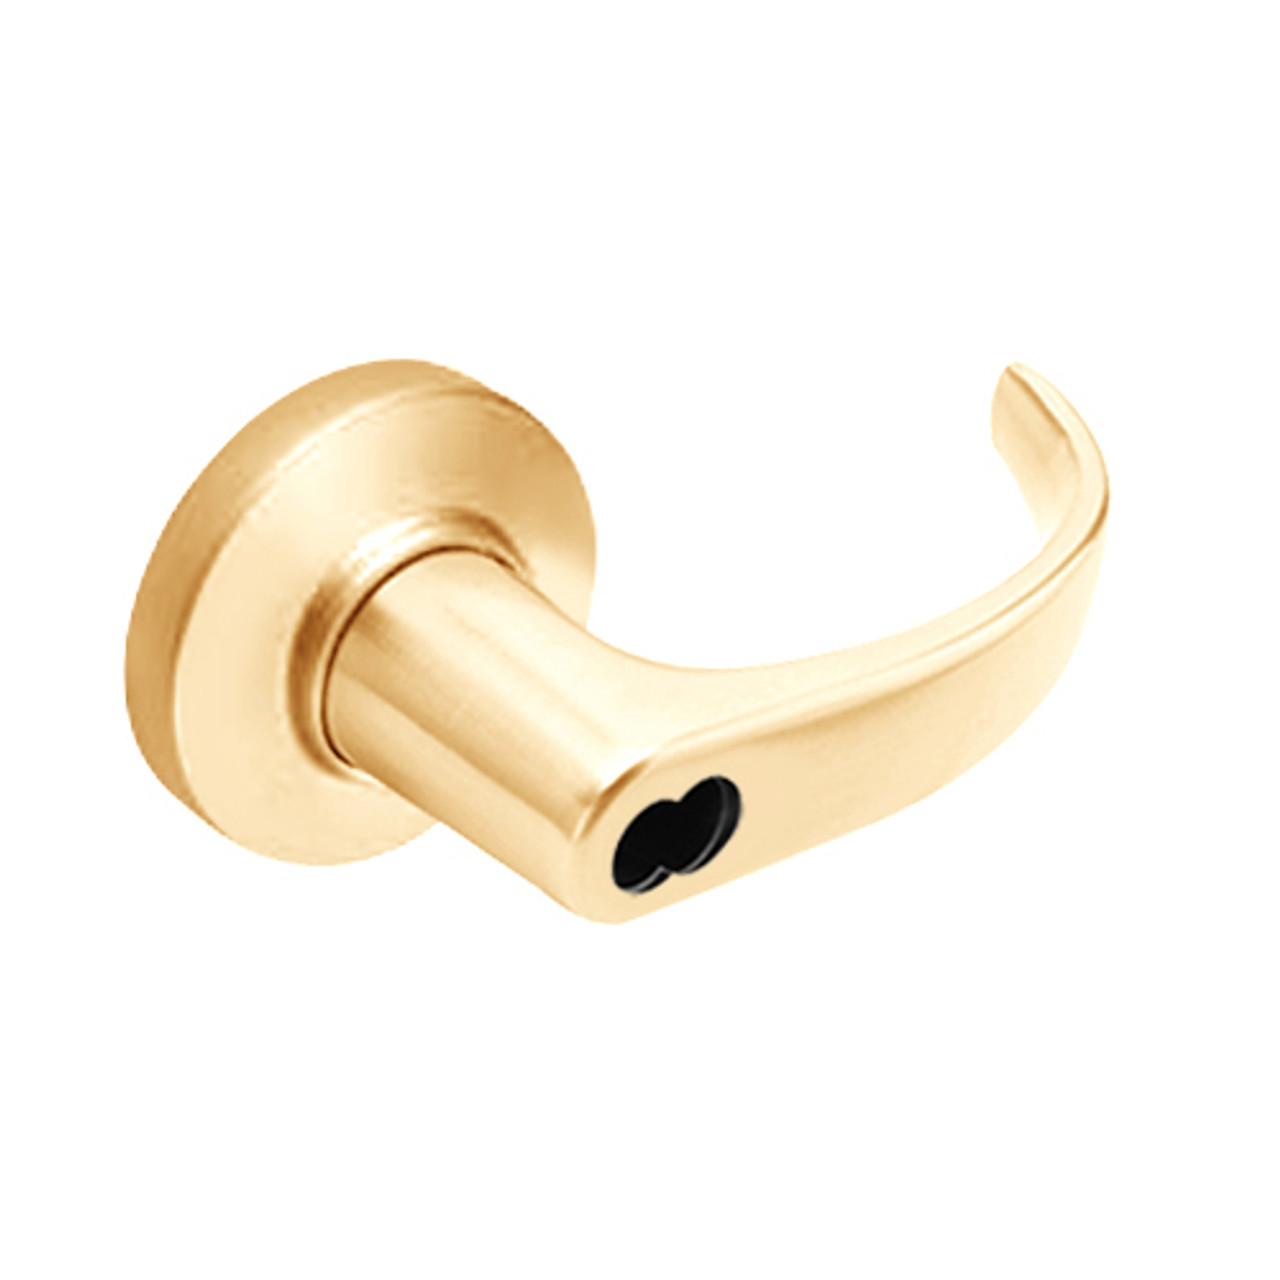 9K57E14CSTK611 Best 9K Series Service Station Cylindrical Lever Locks with Curved with Return Lever Design Accept 7 Pin Best Core in Bright Bronze